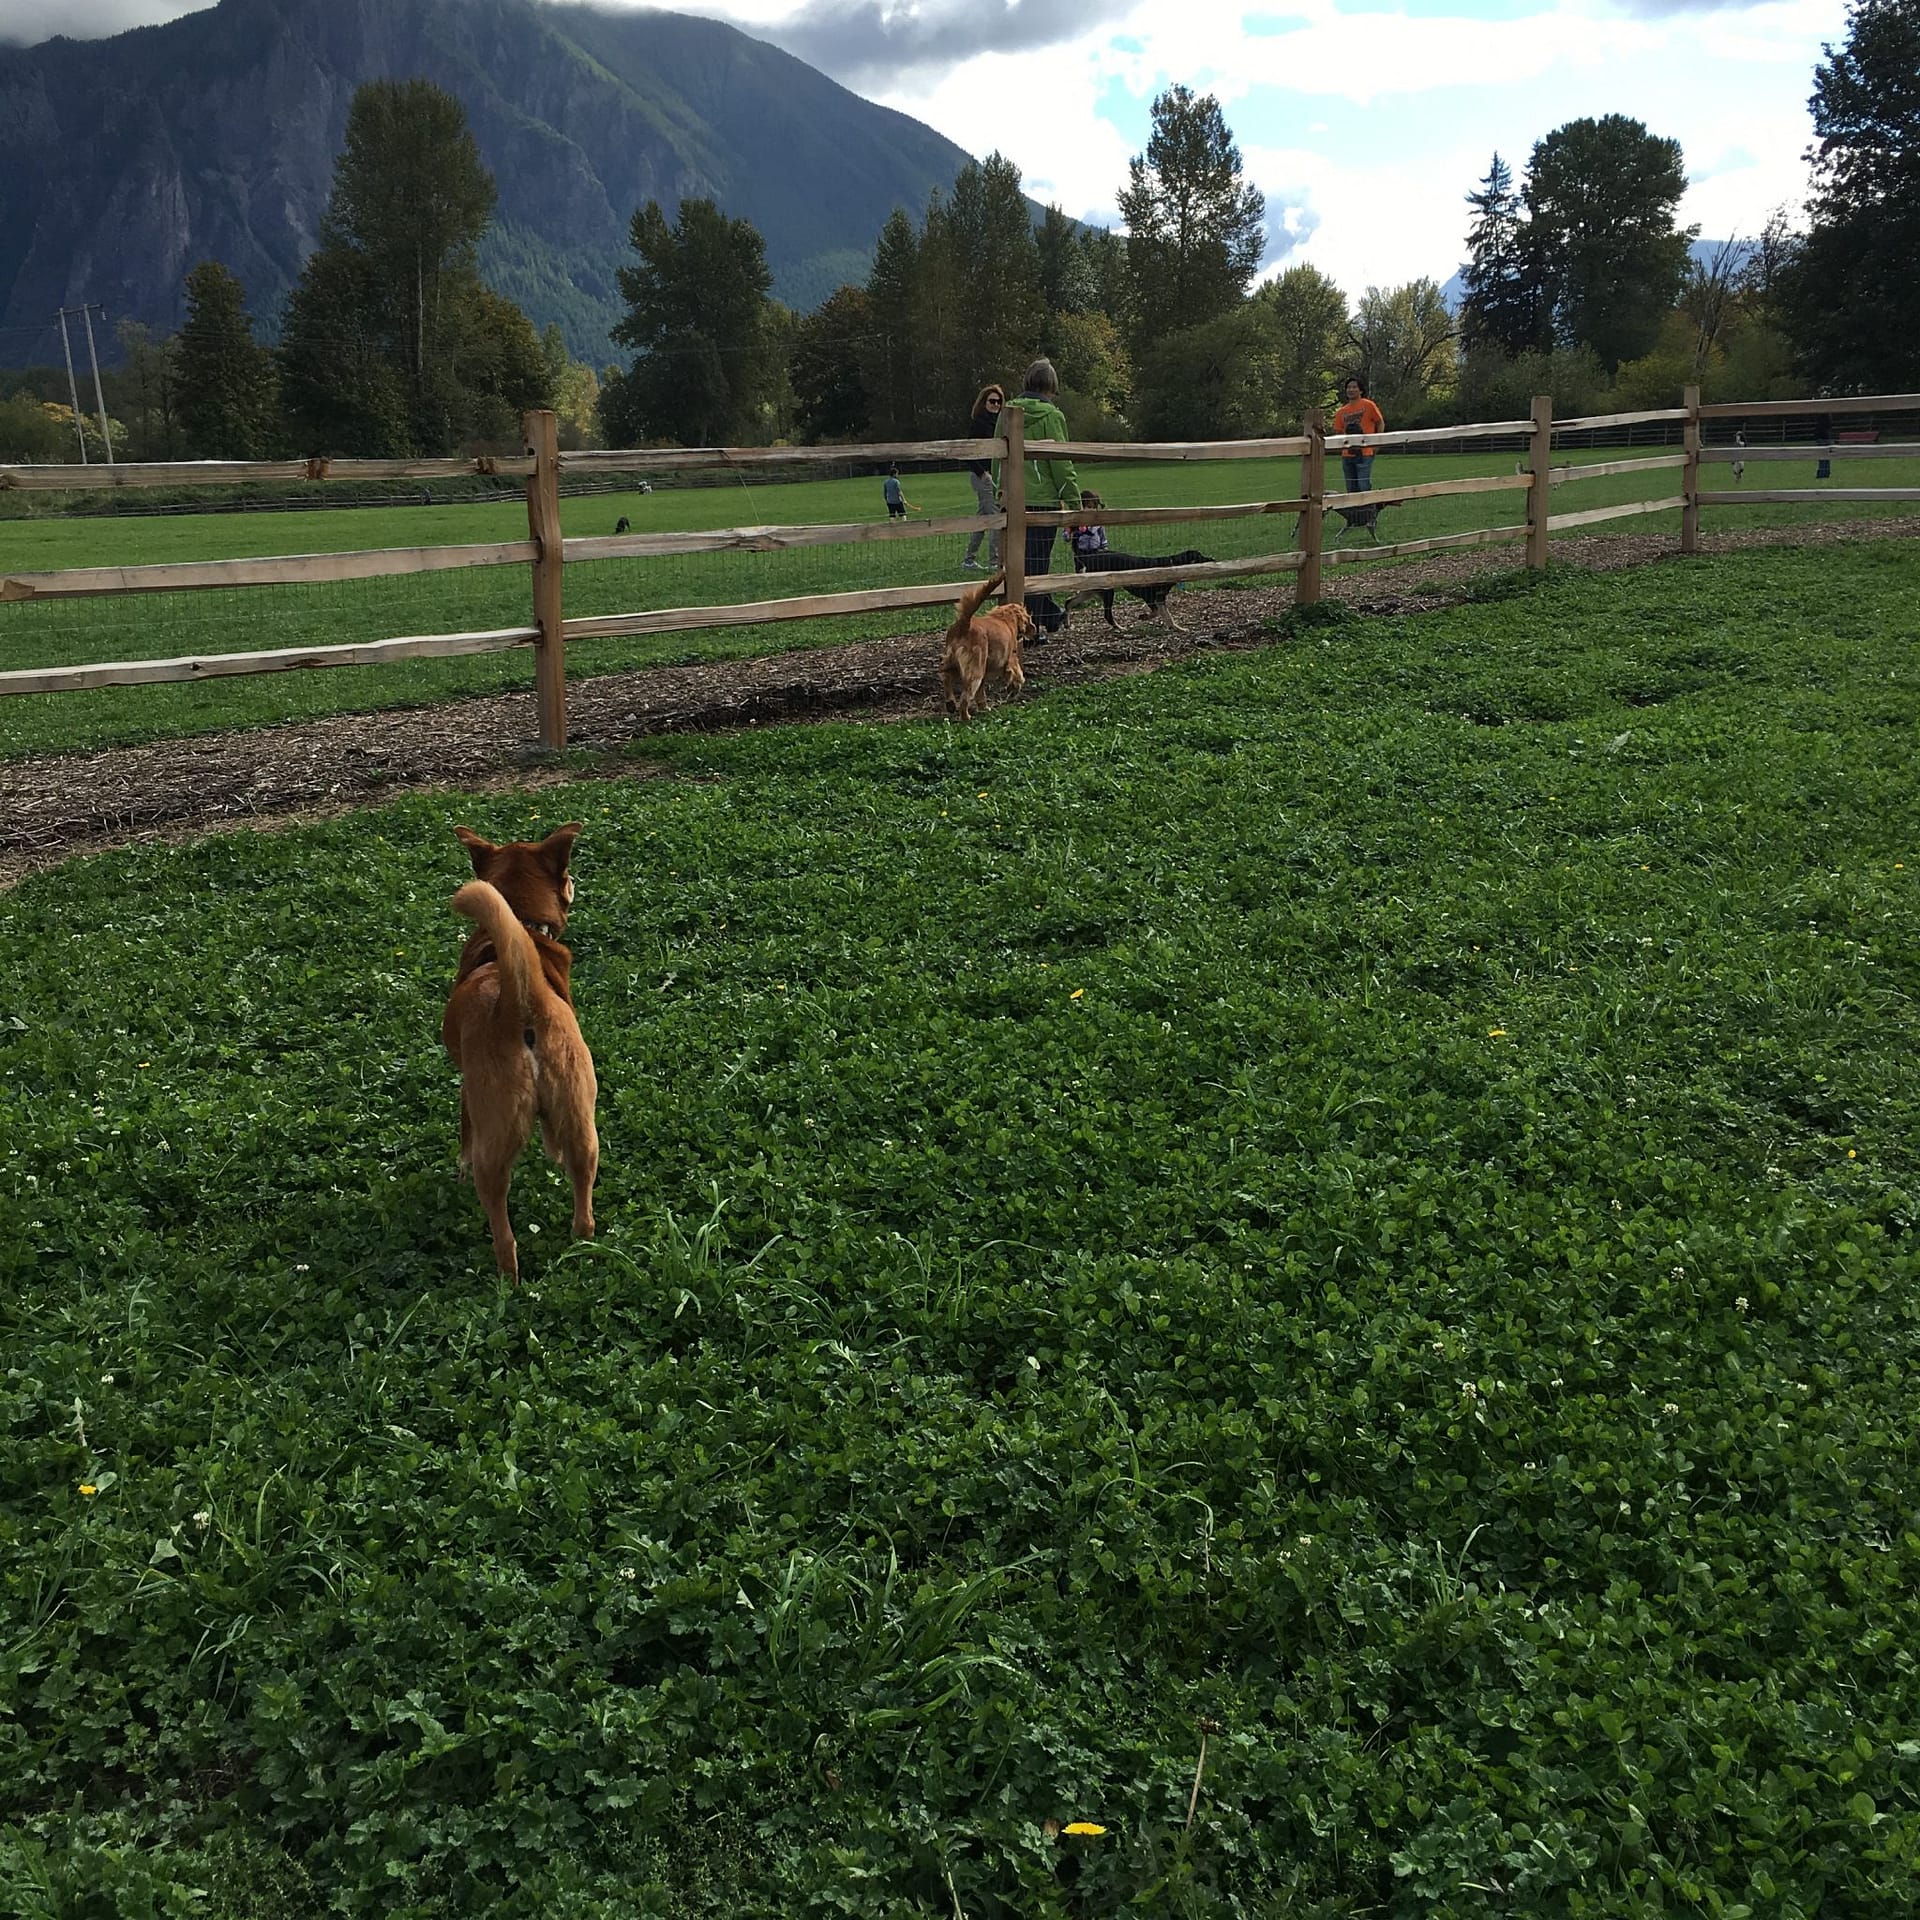 Three Forks Dogs Park in Snoqualmie, Washington